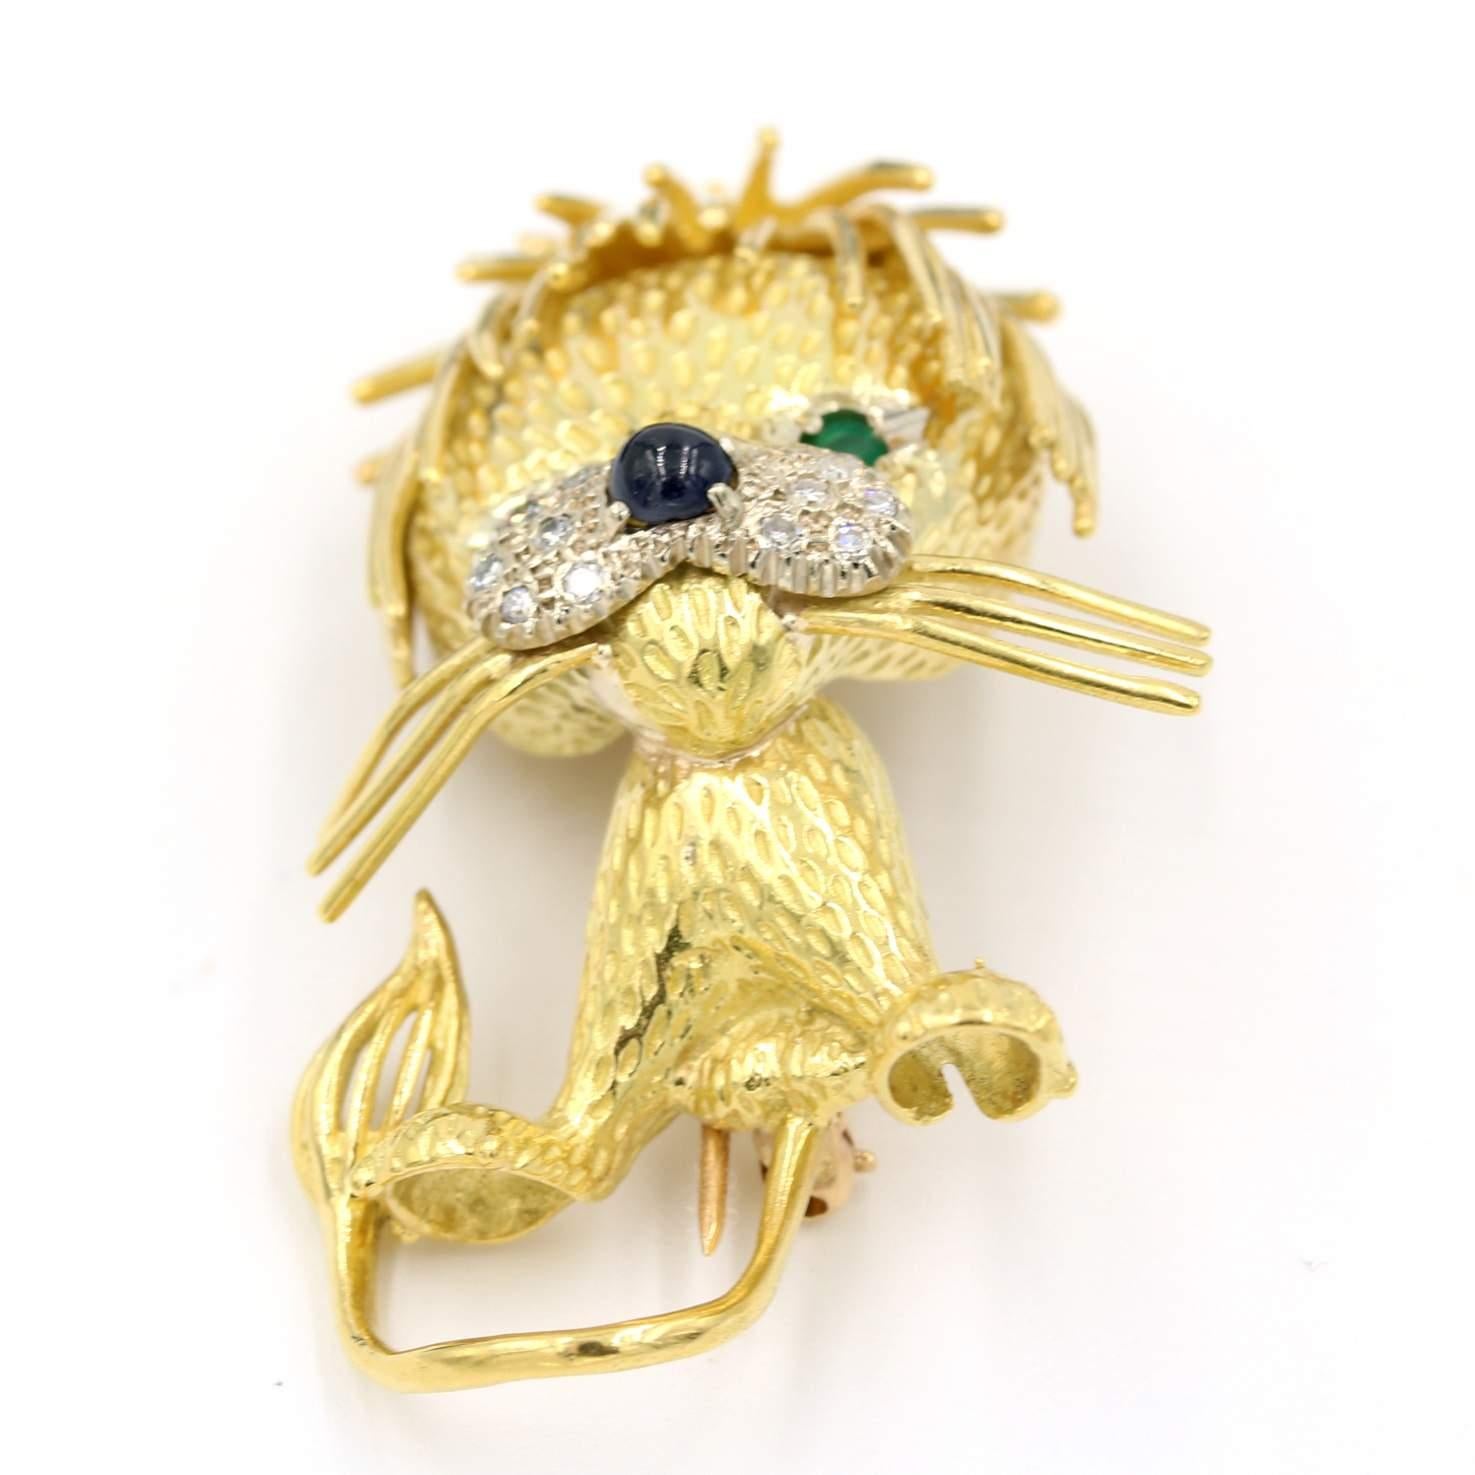 Lion Pin/Brooch In 18K Yellow Gold Featuring Emerald In The Eyes, A Sapphire Nose, And A Diamond Mouth. 